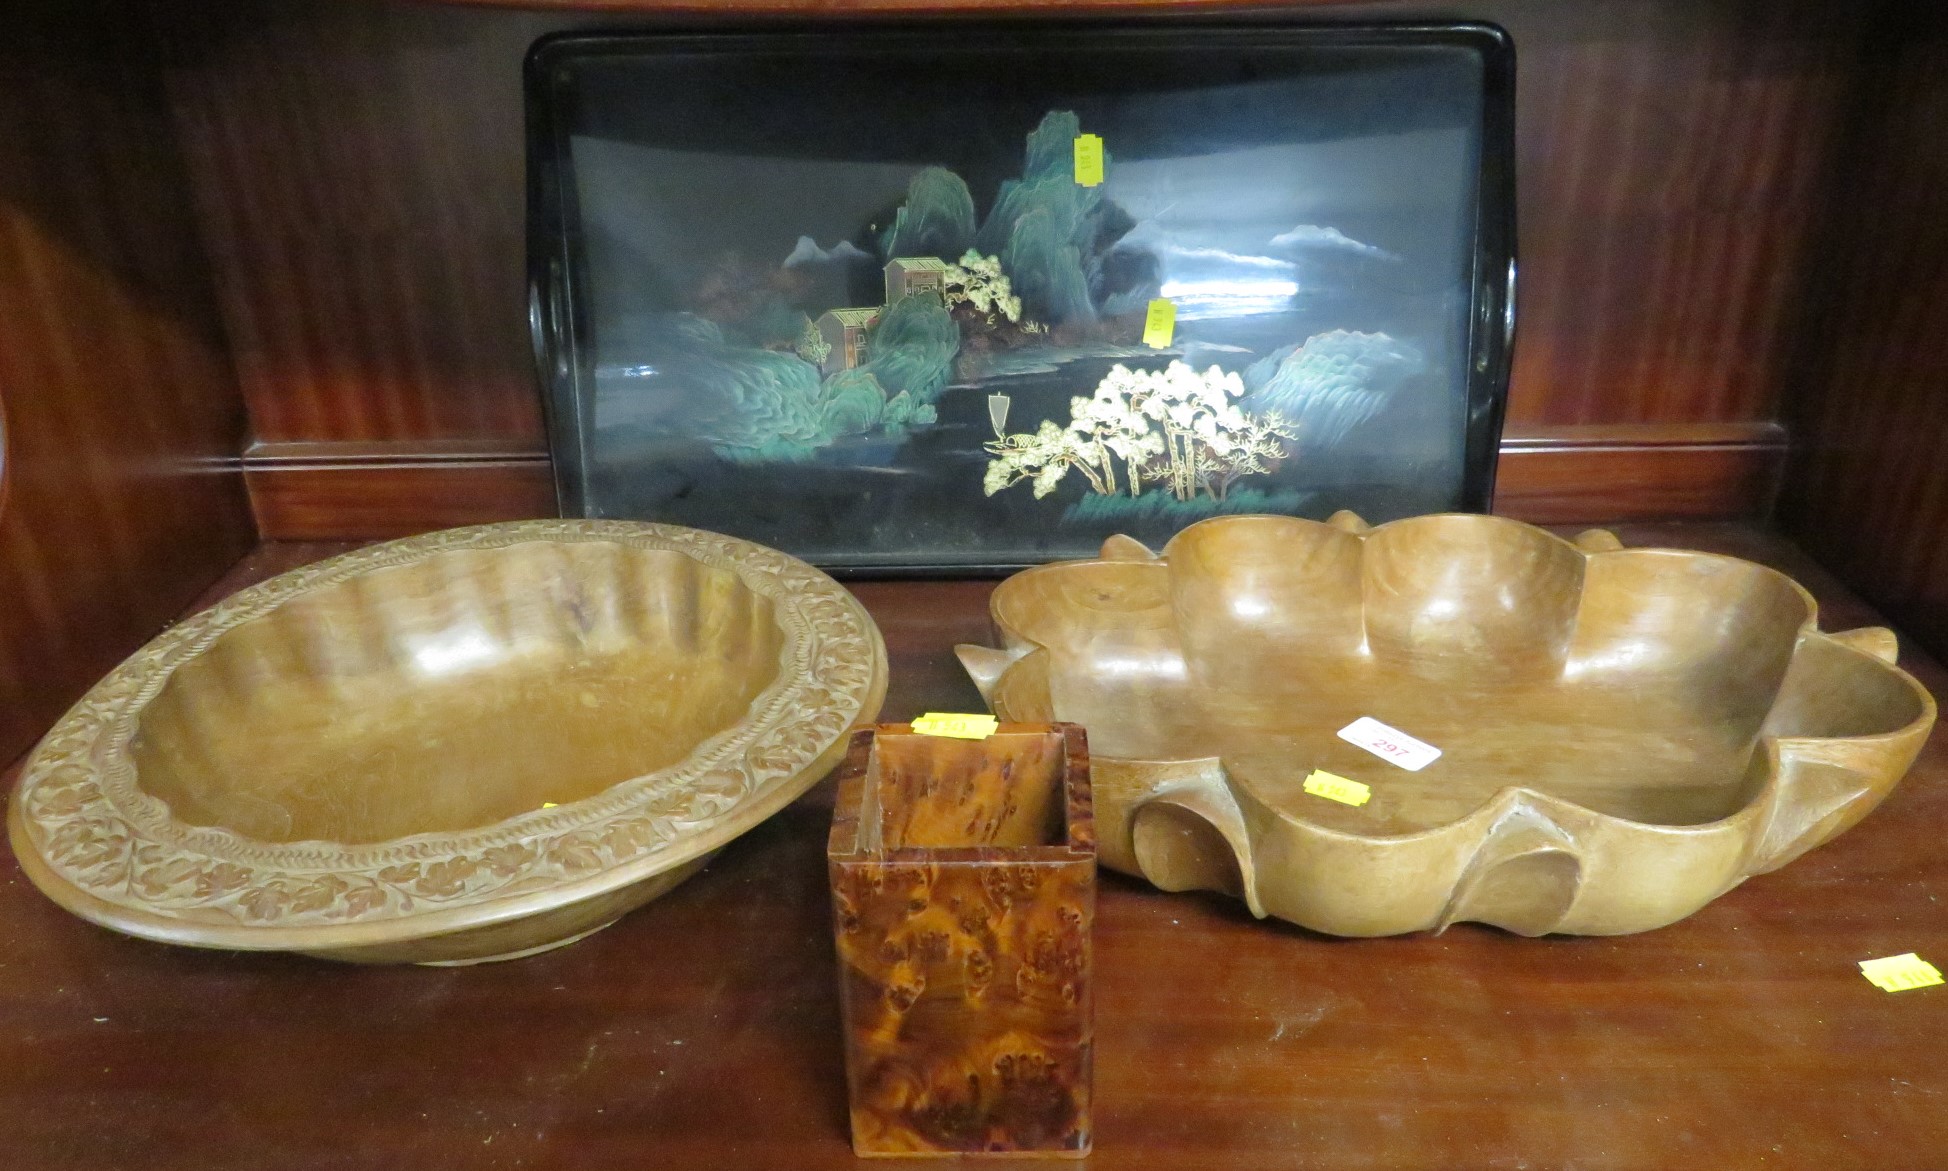 TWO WOODEN BOWLS, WALNUT PENCIL HOLDER AND DECORATIVE TEA TRAY